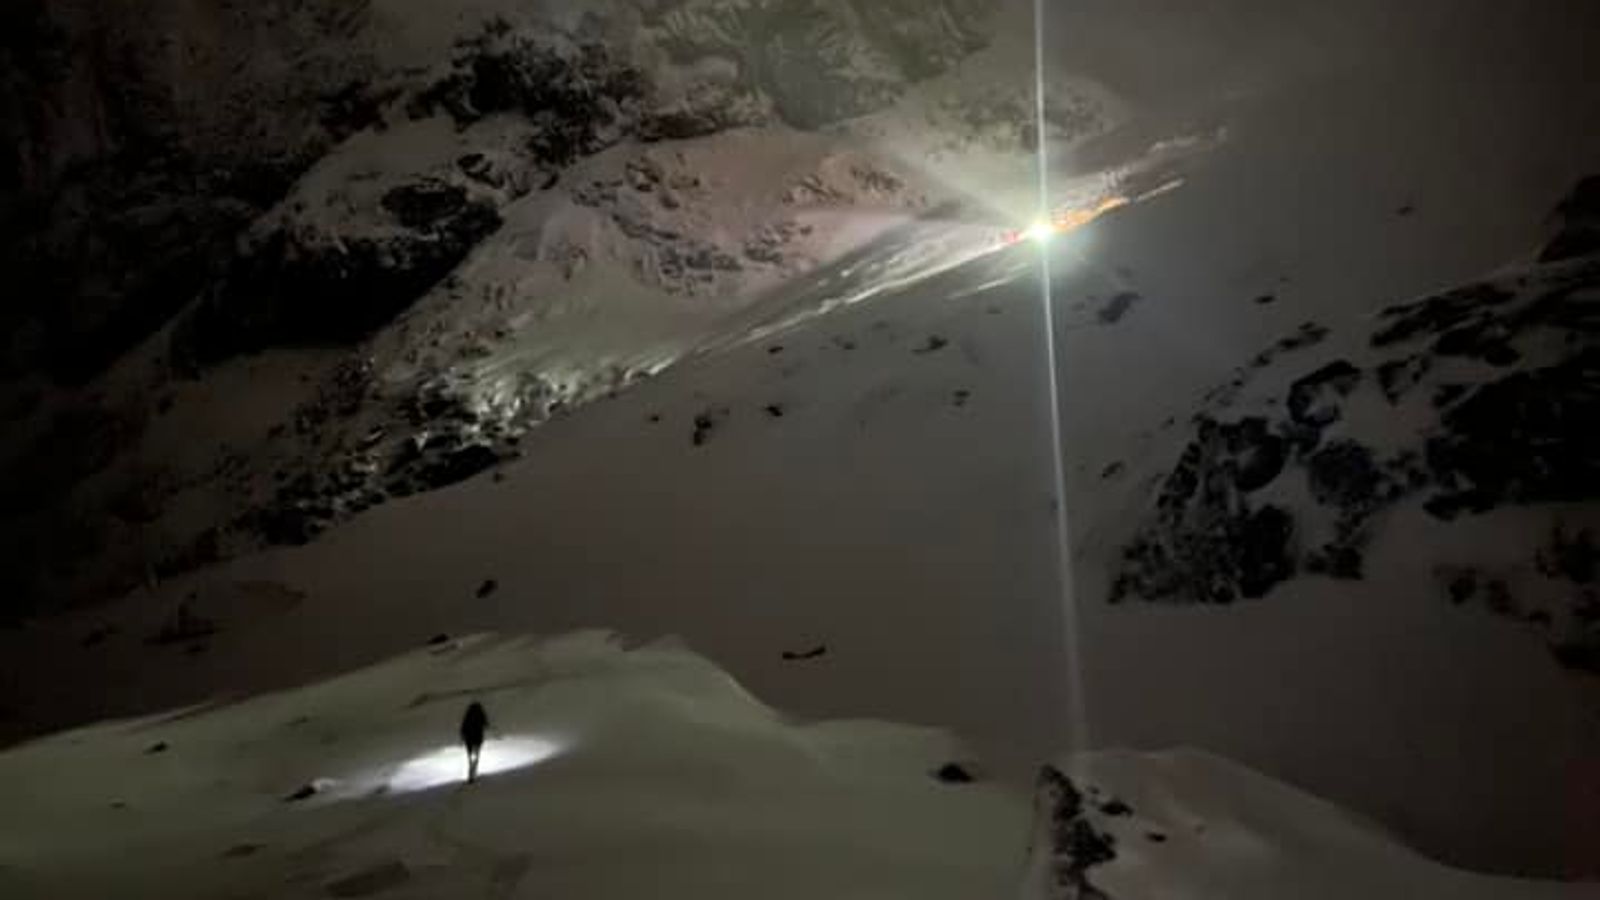 Climber dies and another injured after avalanche on Ben Nevis